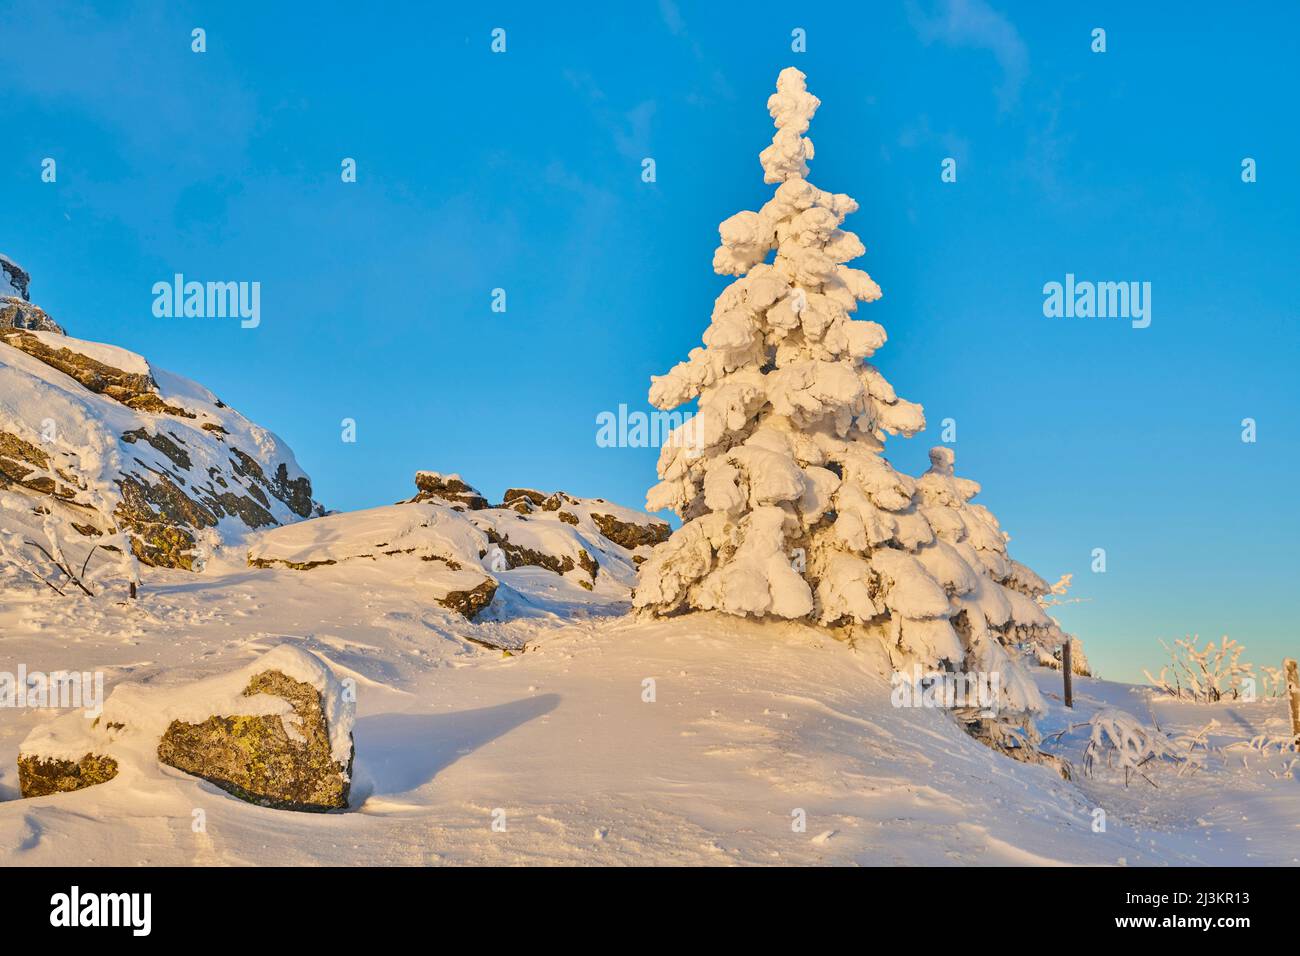 Frozen Norway spruce or European spruce (Picea abies) tree at sunrise on a bright winter day on Mount Arber in the Bavarian Forest; Bavaria, Germany Stock Photo